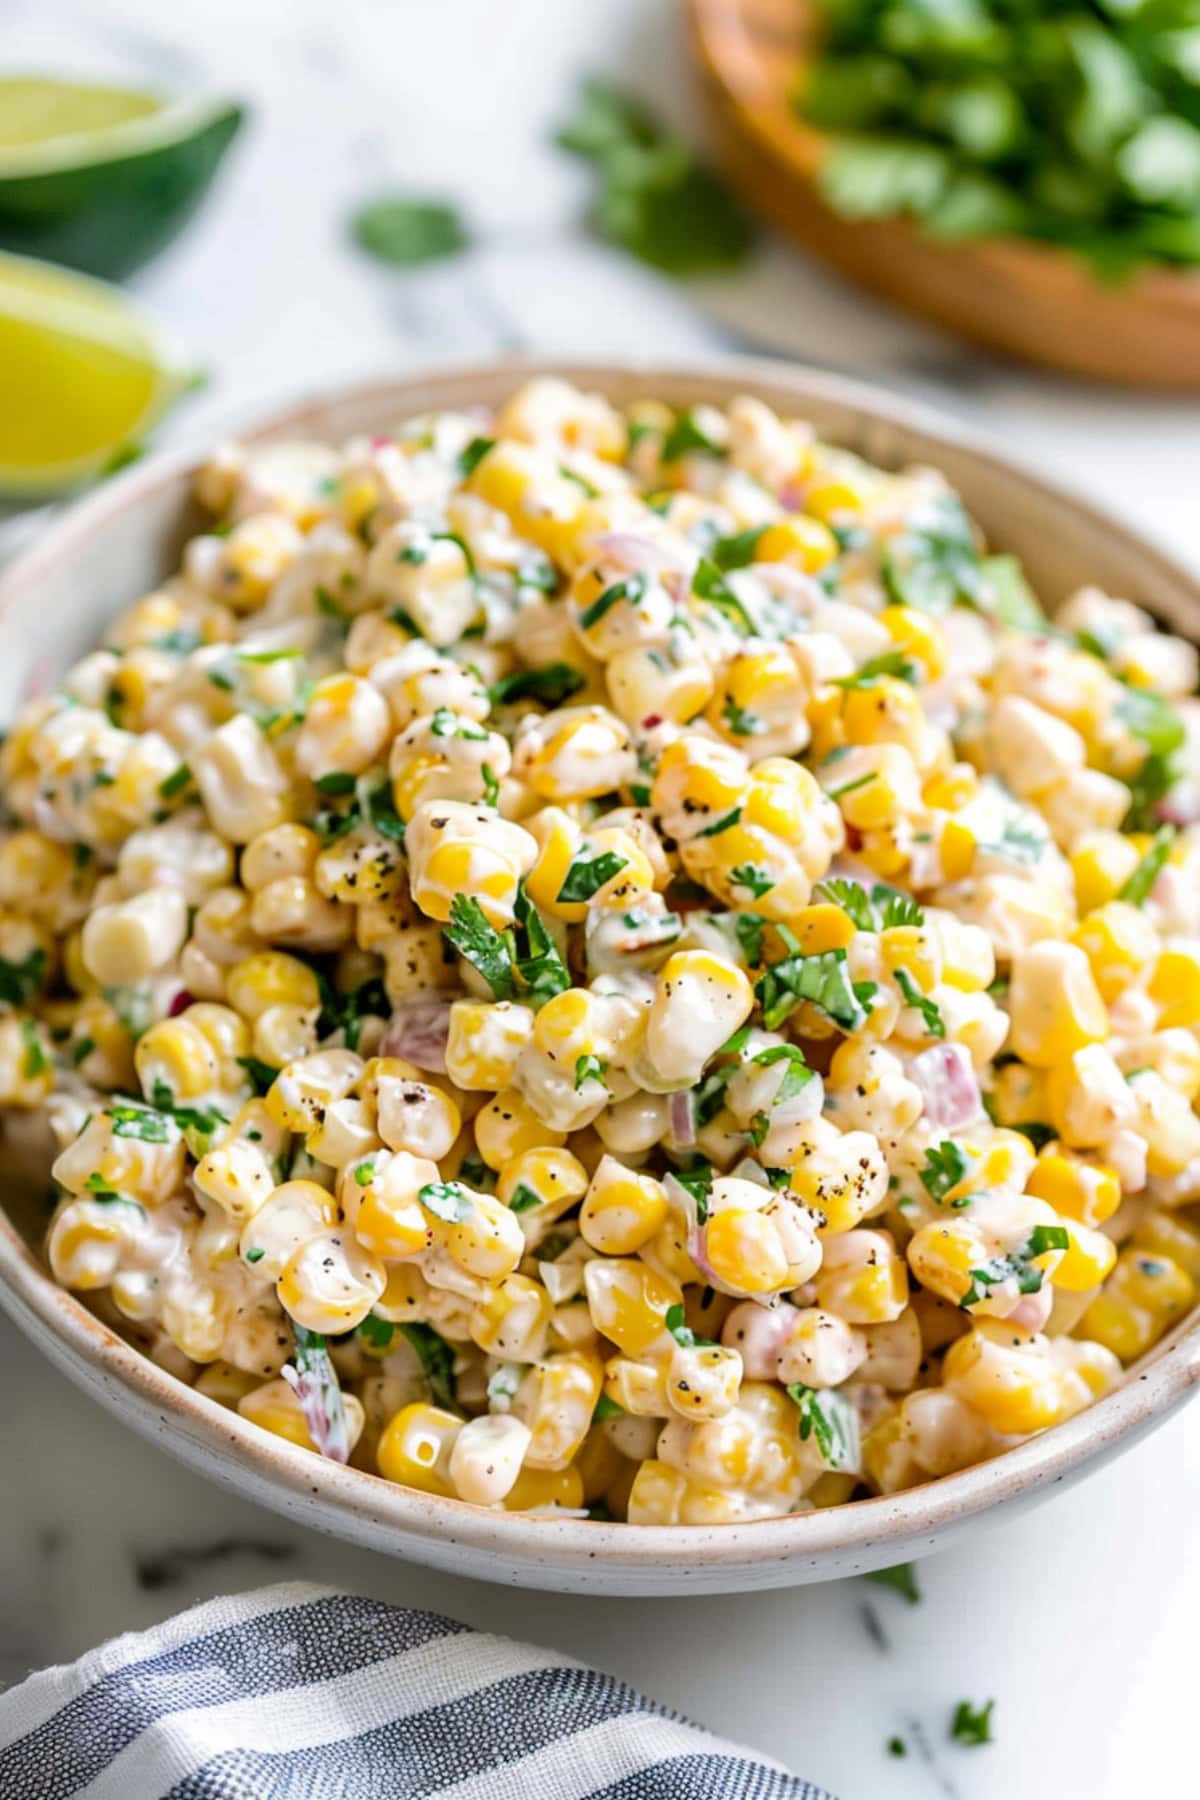 Irresistible Esquites, garnished with crumbled cotija cheese and chopped green bell peppers.